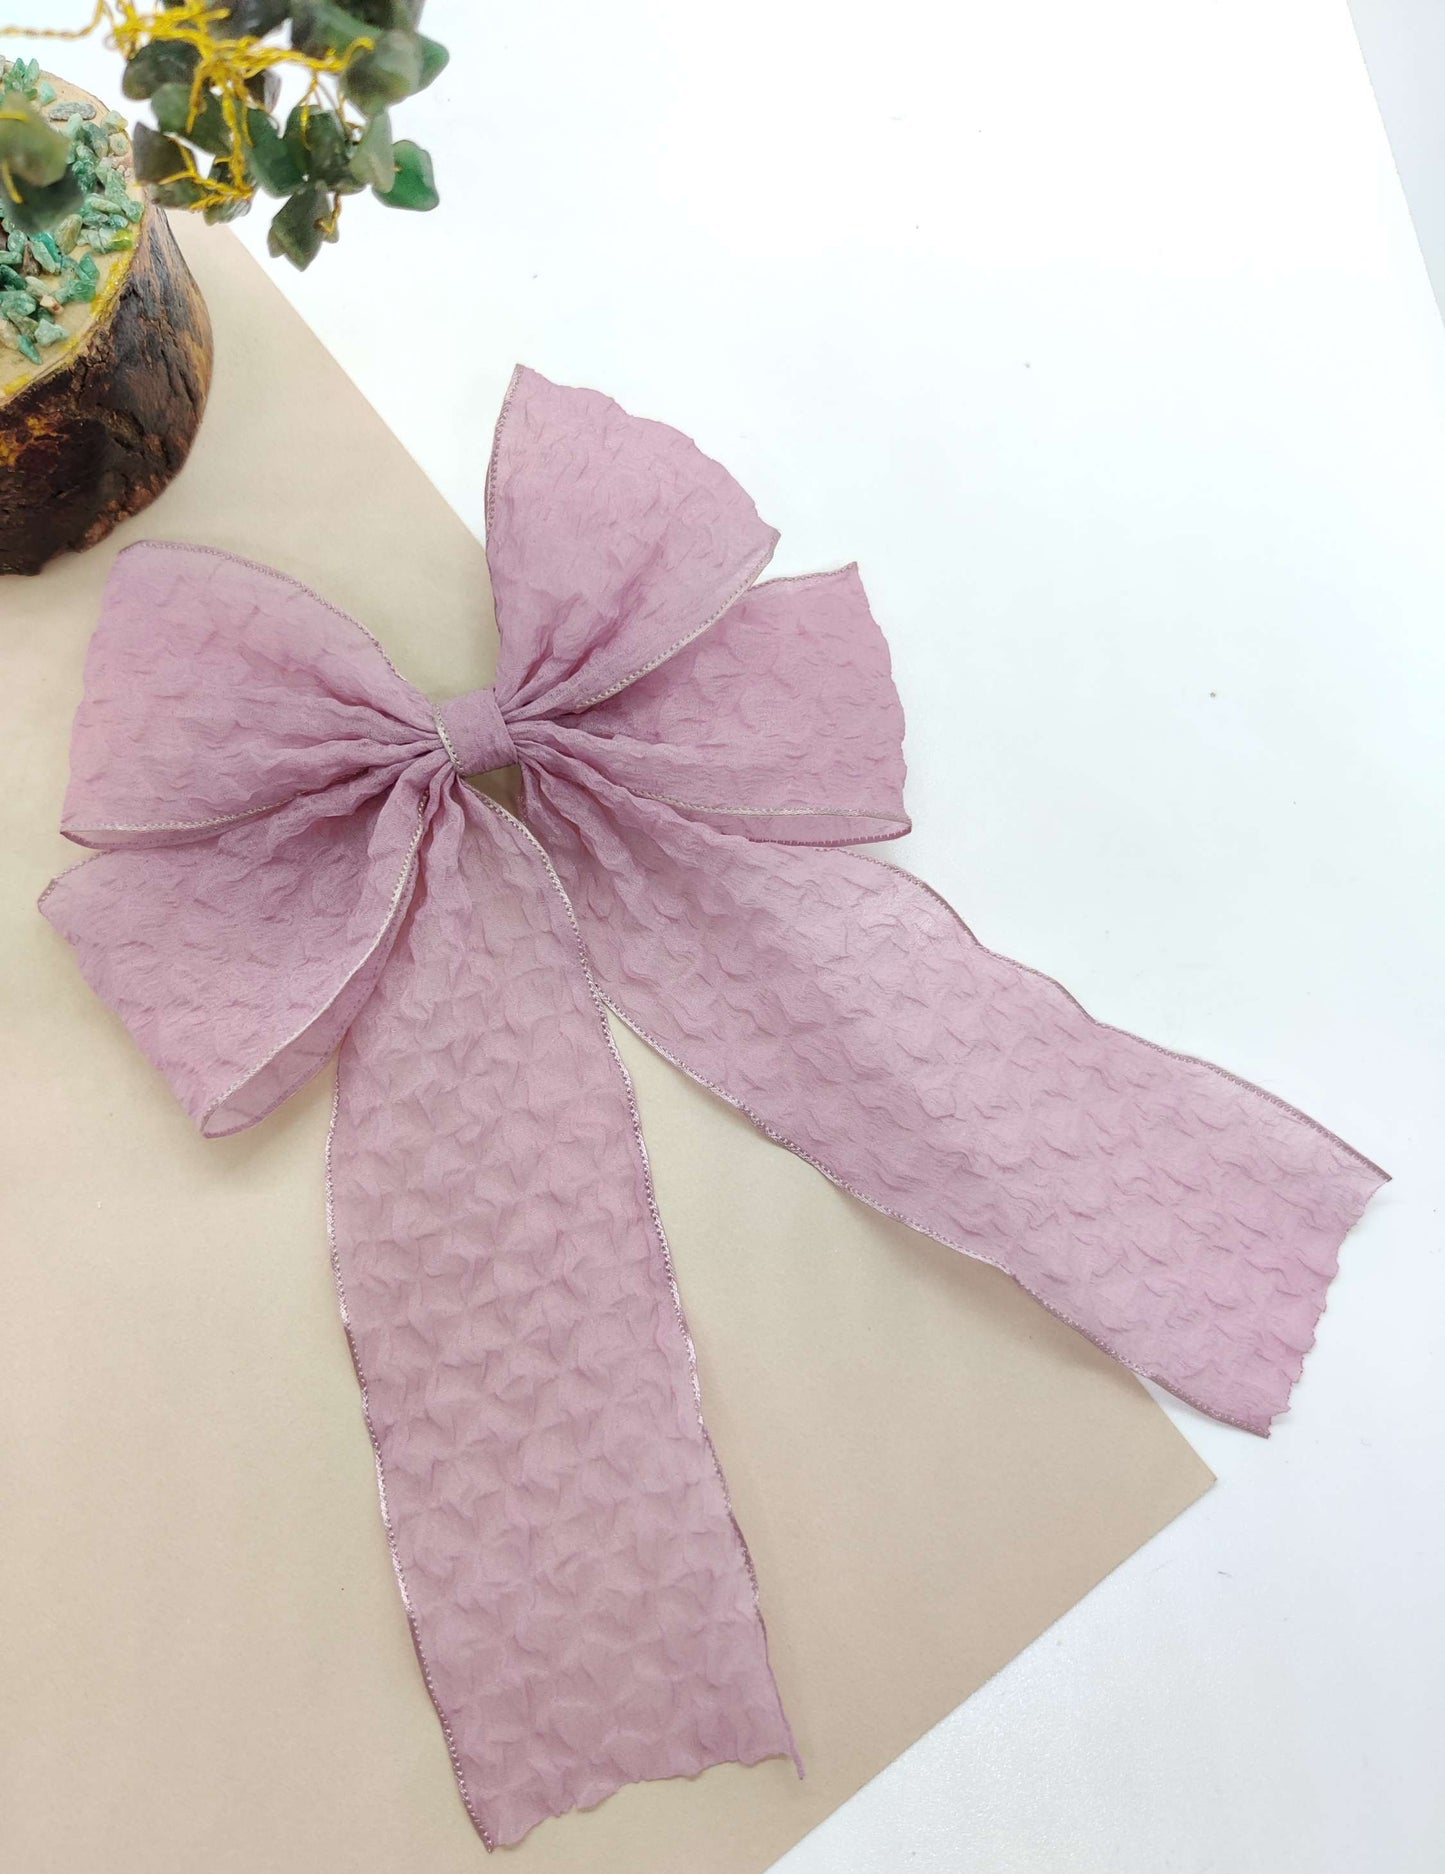 SOLID TEXTURED HANDCRAFTED BOWS